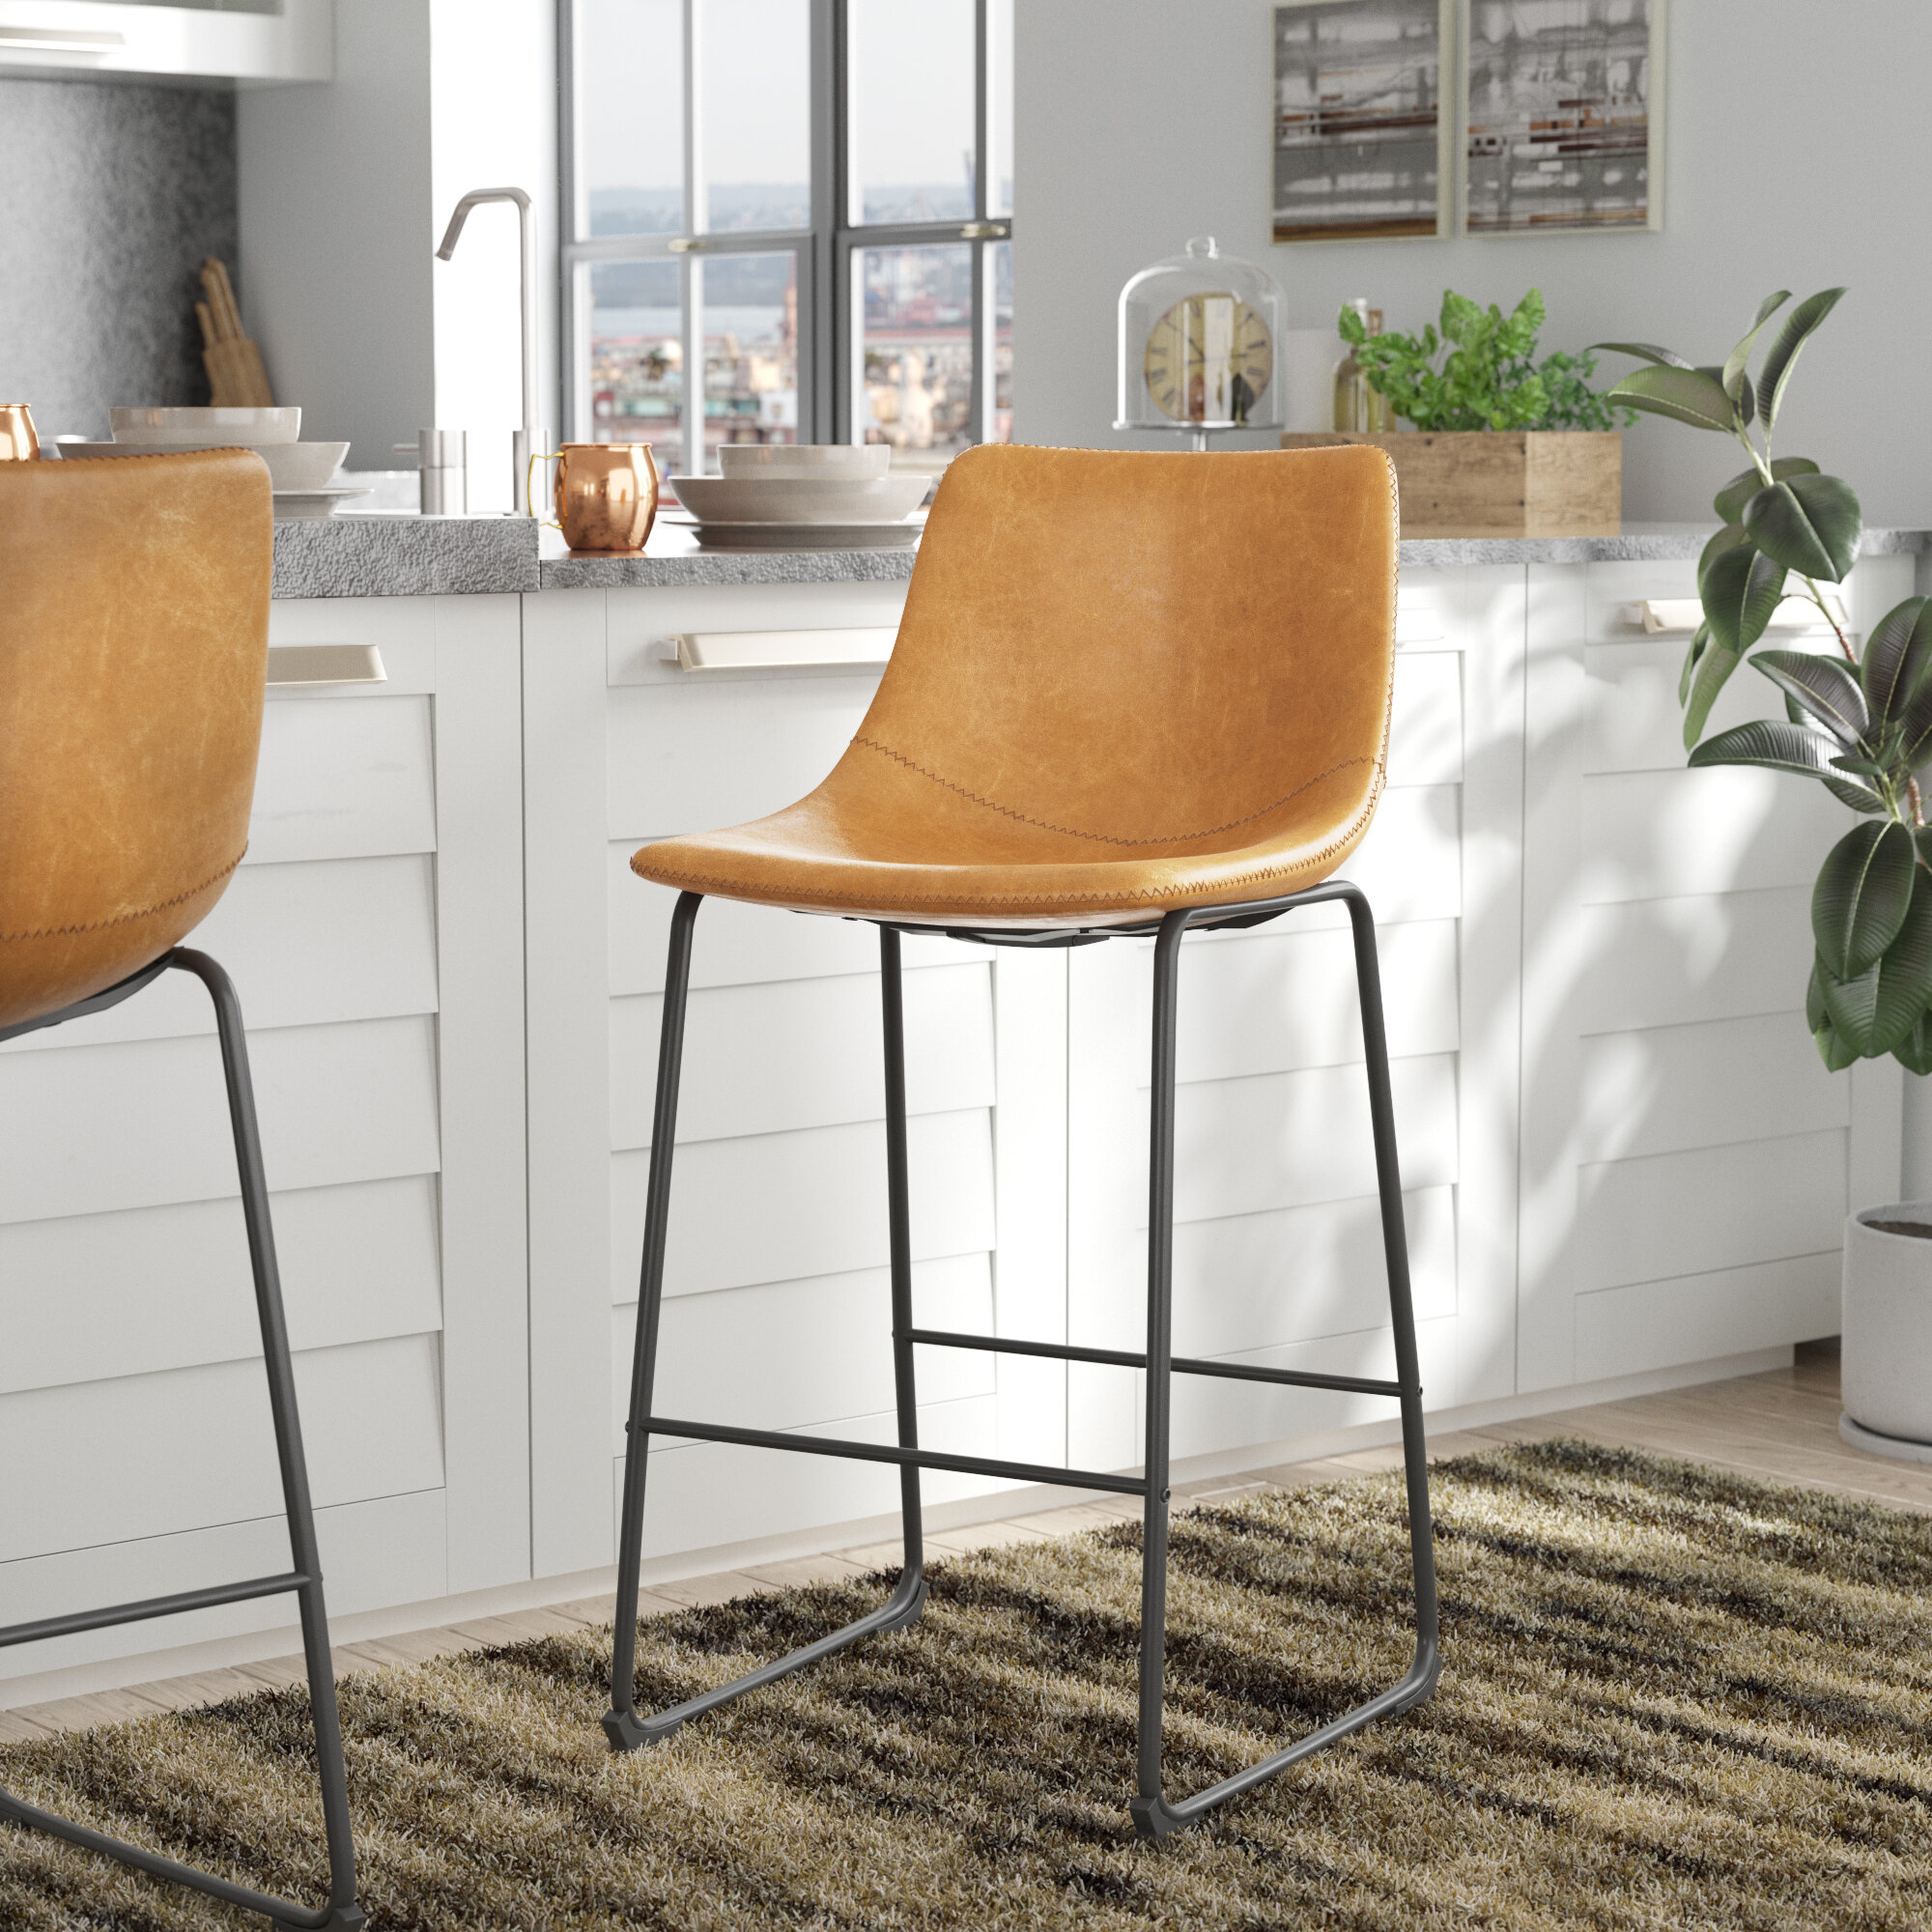 Classic Slim Style Counter Bar Chair in Vintage Espresso Leatherette Fabric 